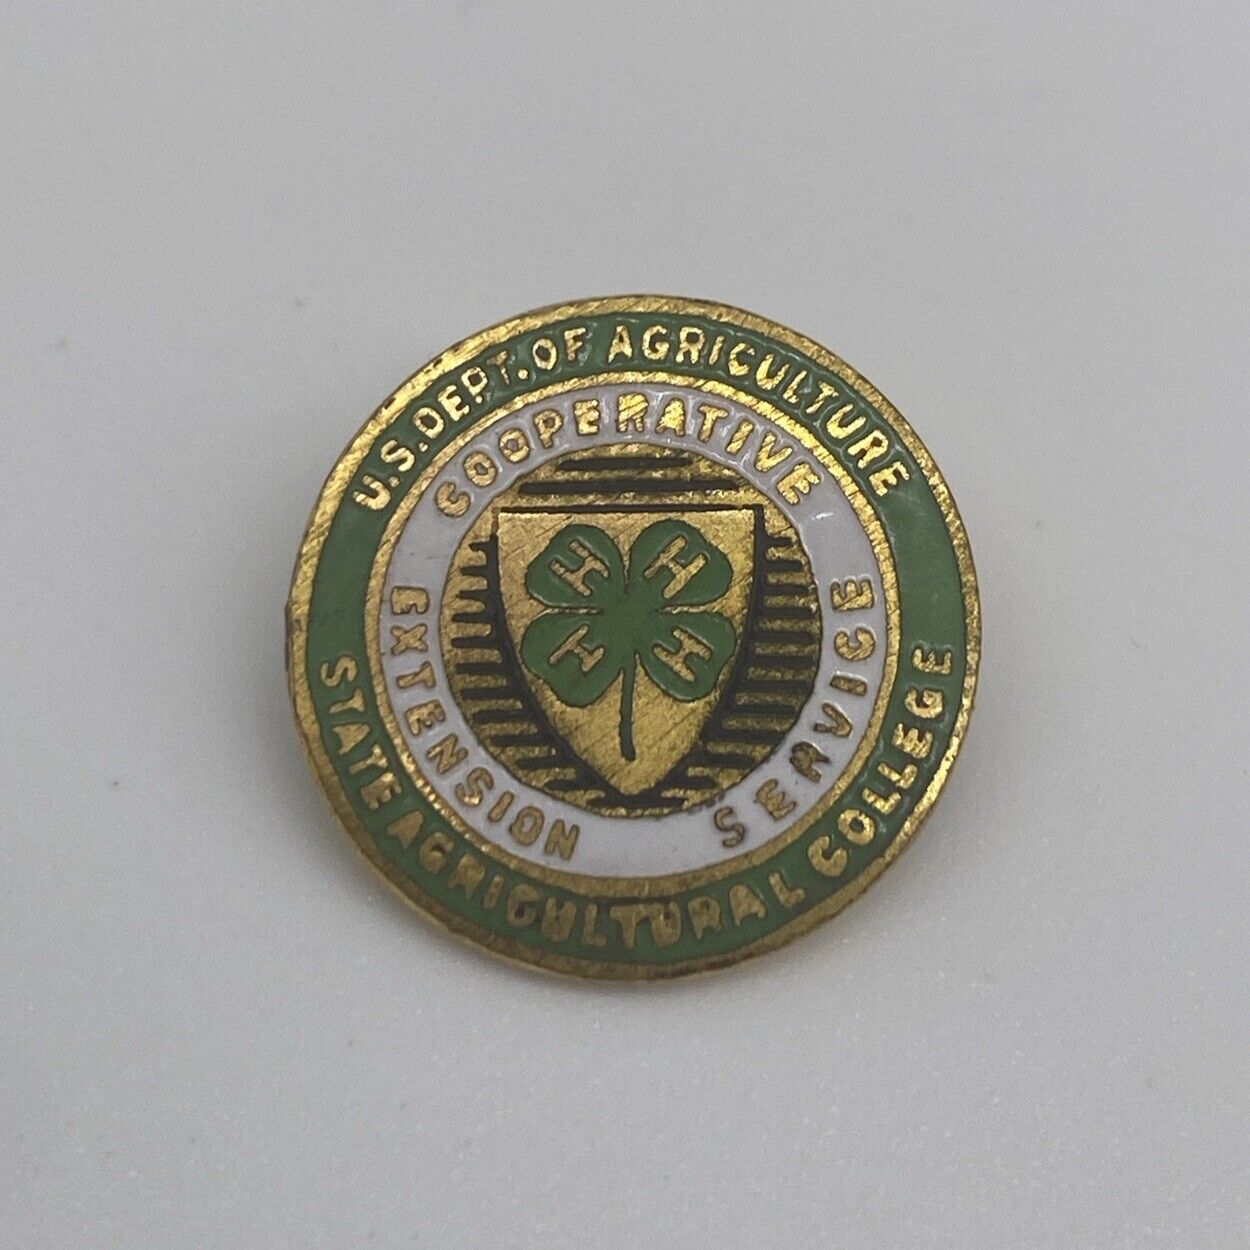 Vintage 4H Department Of Agriculture Cooperative Extension Service Lapel Pin